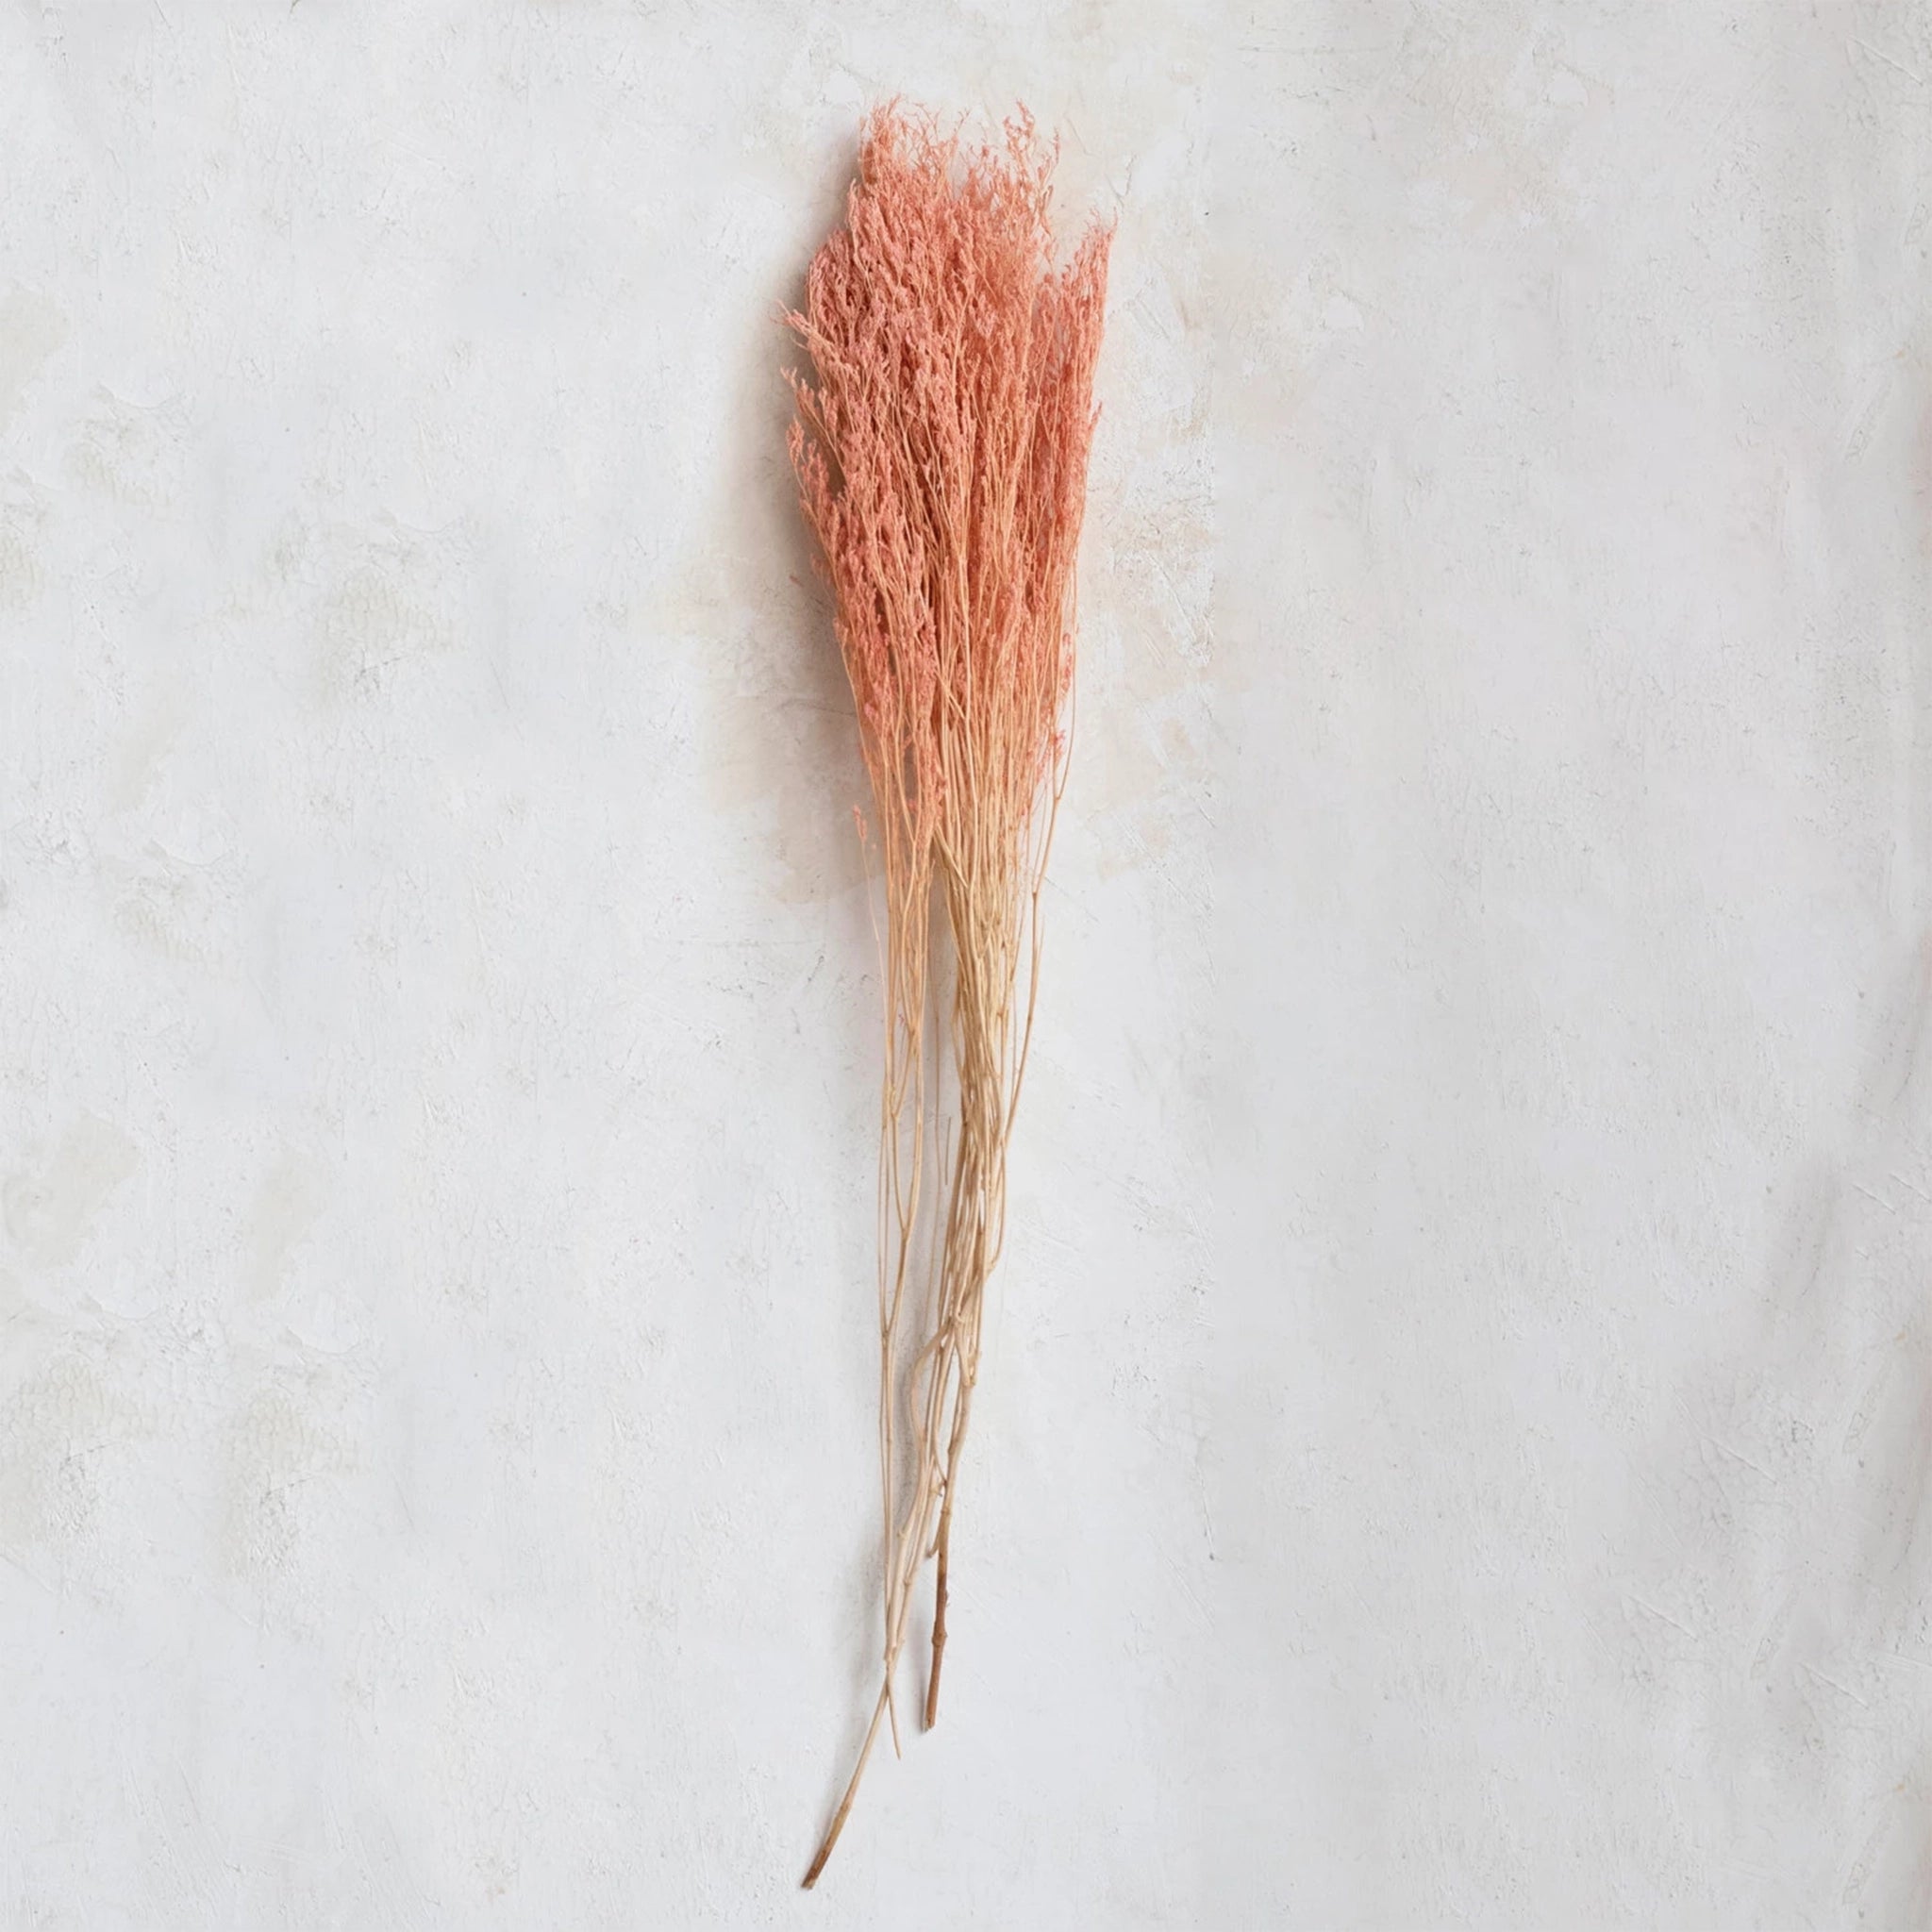 A bundle of dried grass in a light pink shade with long stems.